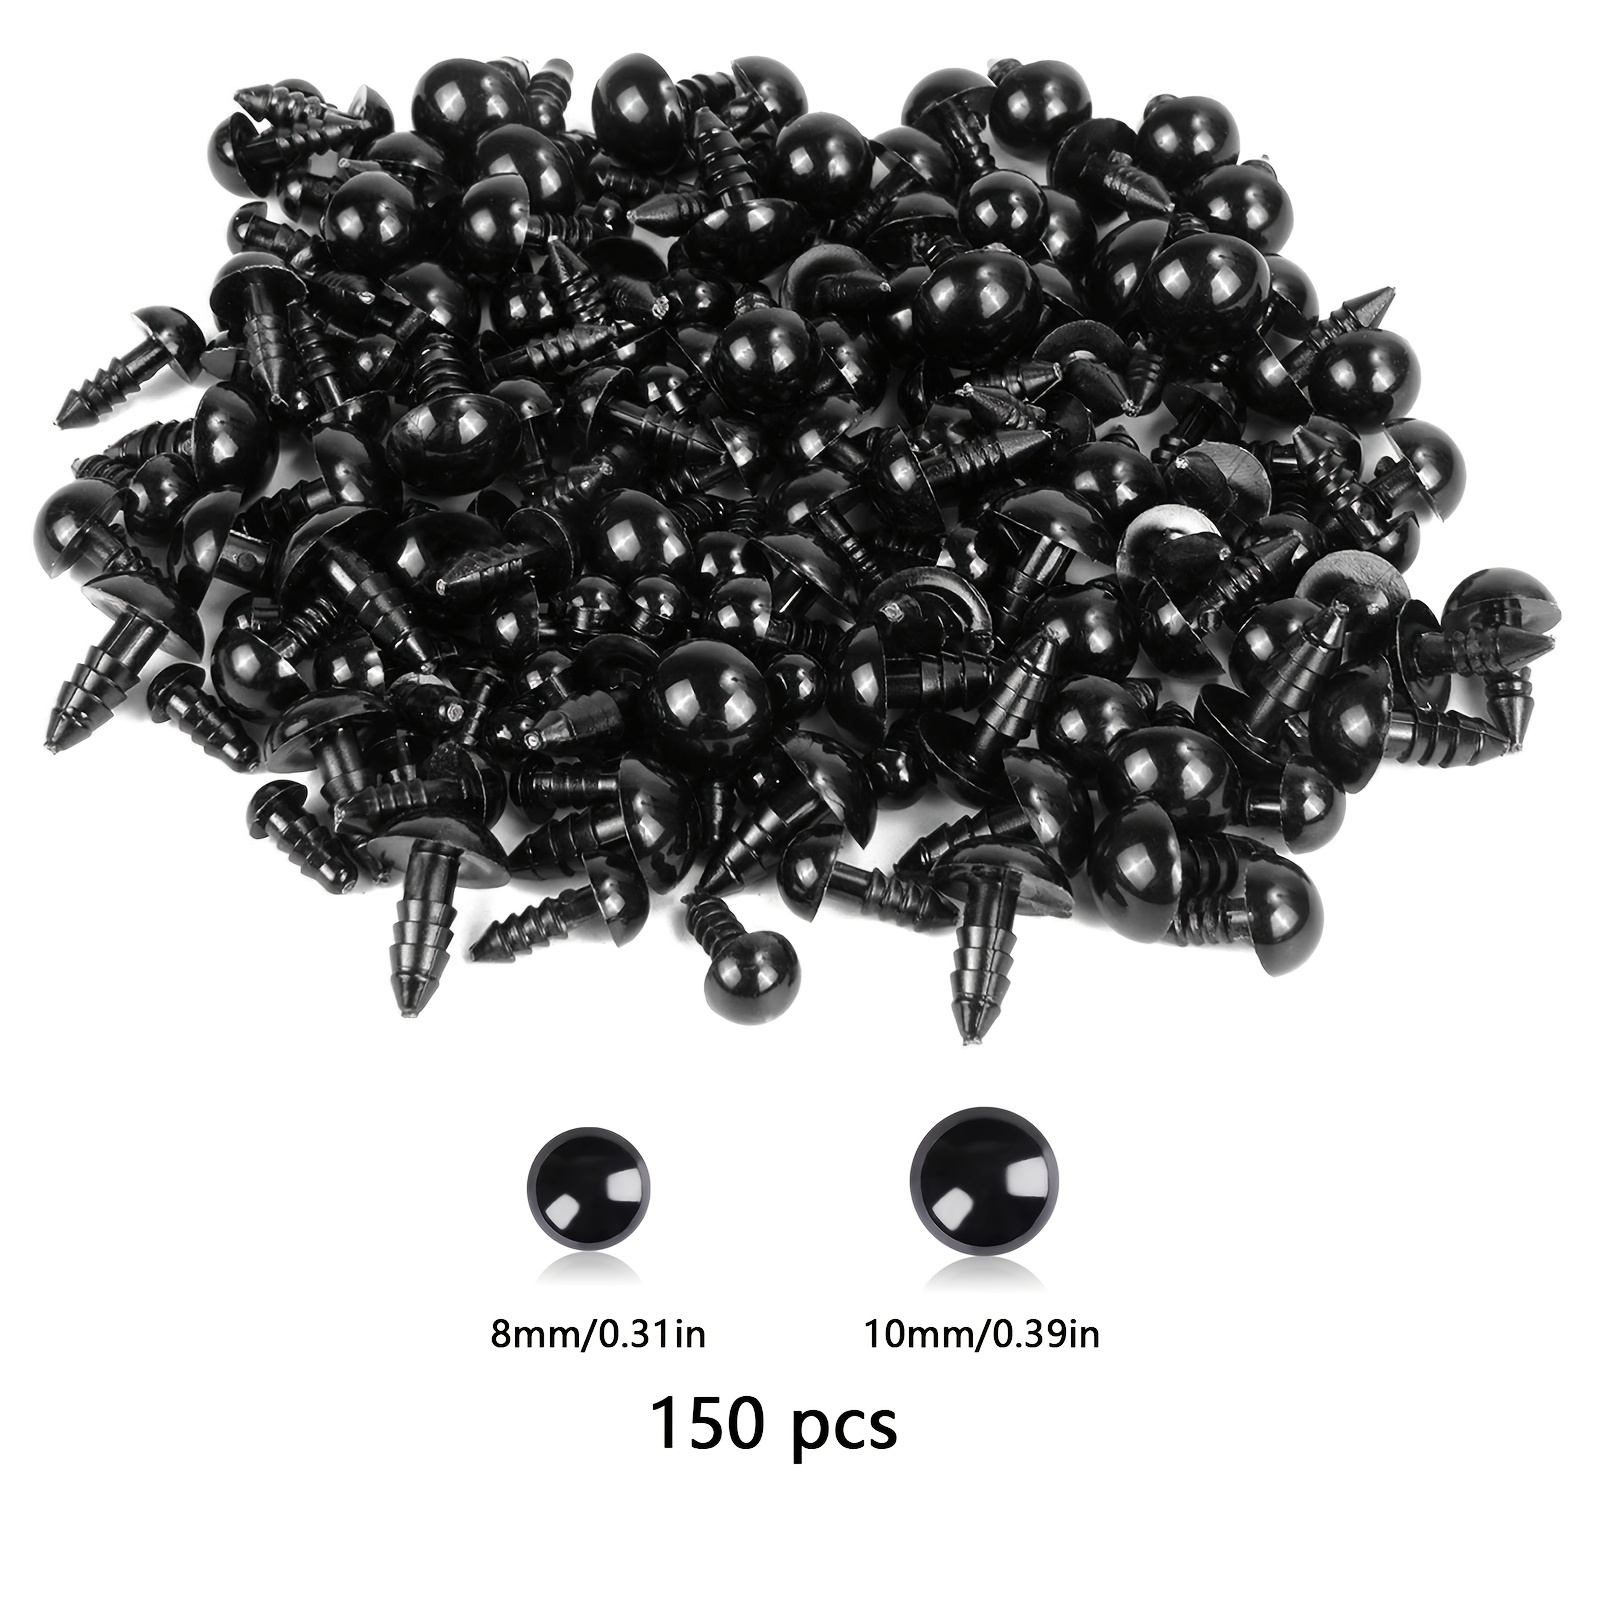 200Pcs 10mm Safety Eyes for Crochet Plastic Black Safety Eyes for Stuffed  Animals Craft Eyes with Washers 